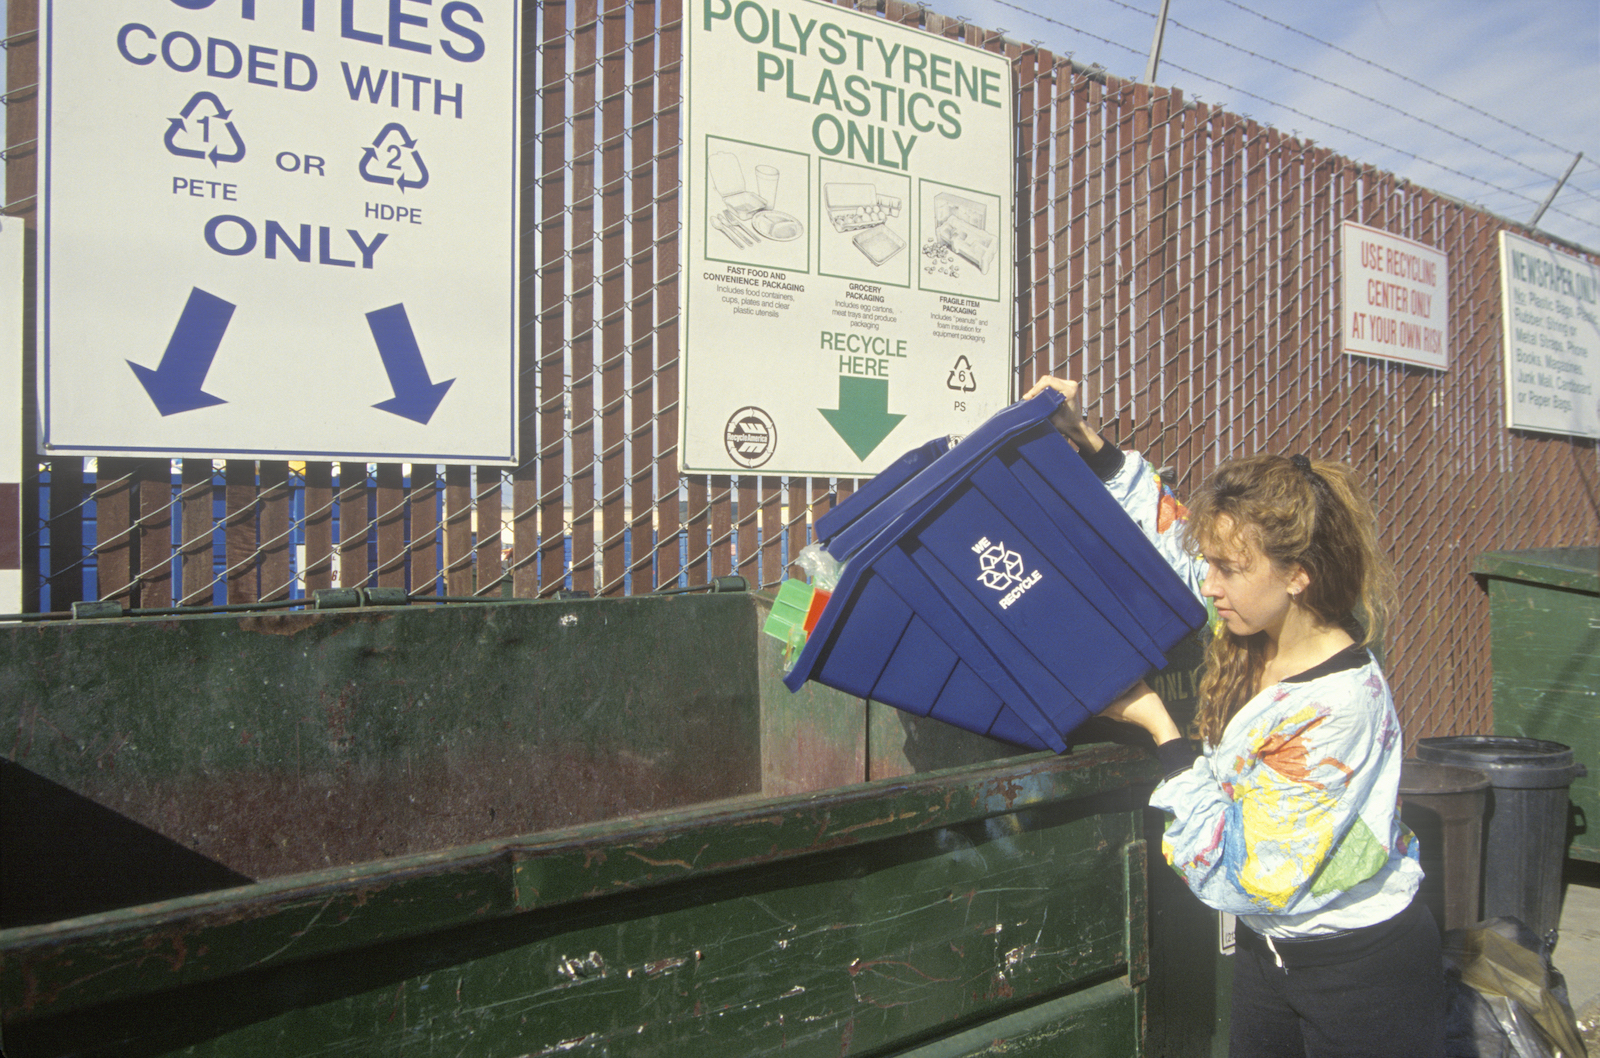 A woman recycling plastics in separate recycling containers at the Santa Monica Recycling Center, California.